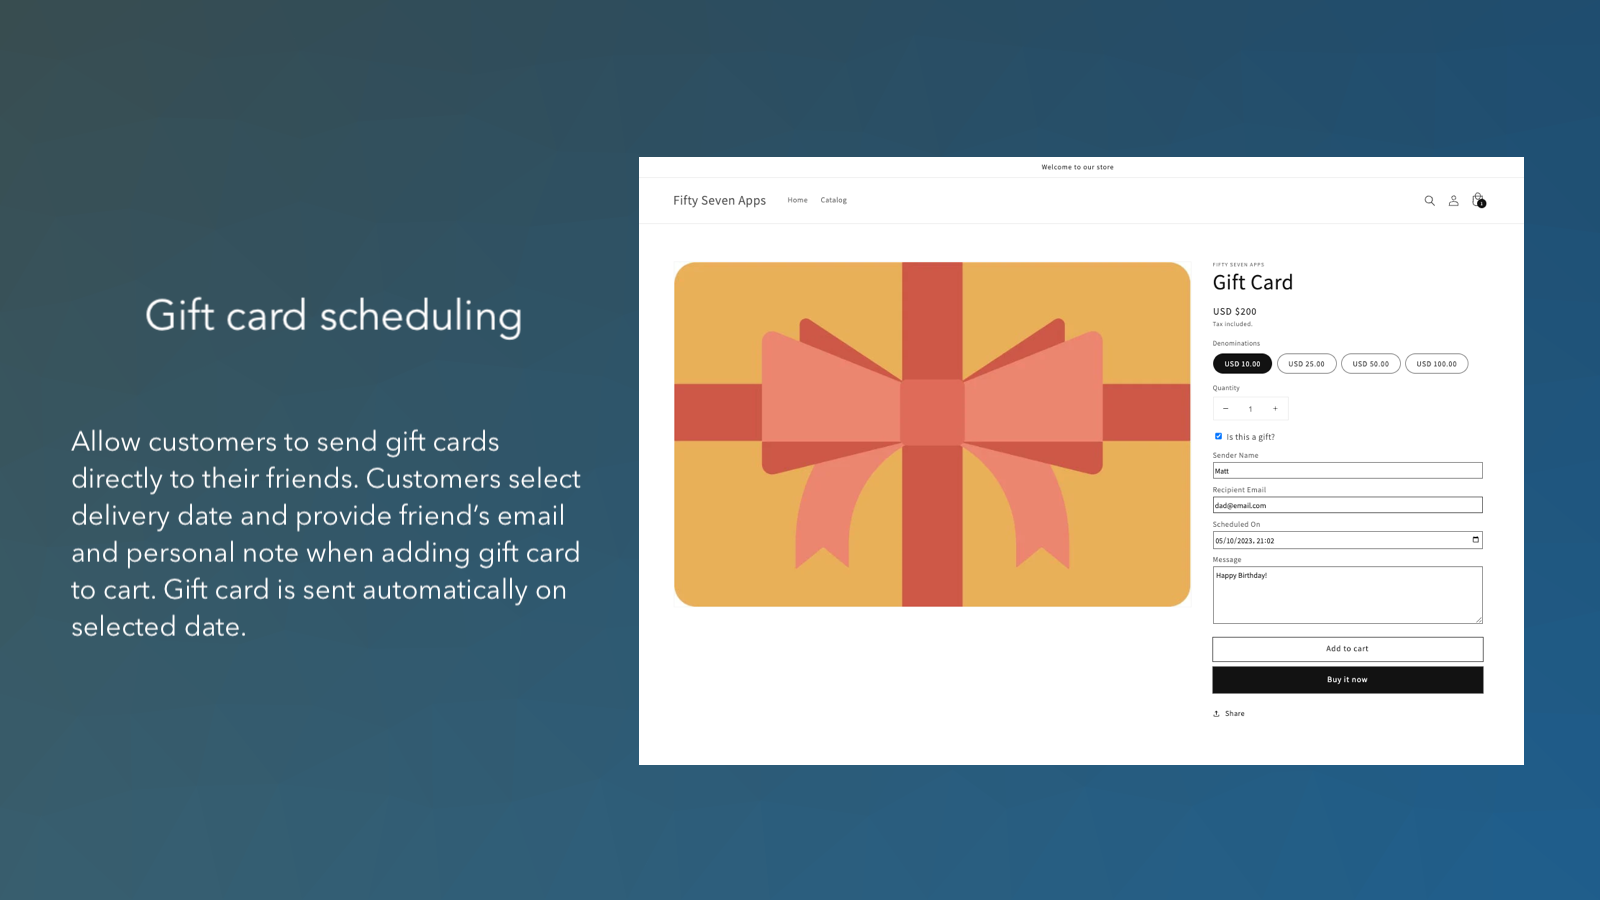 Gift card scheduling